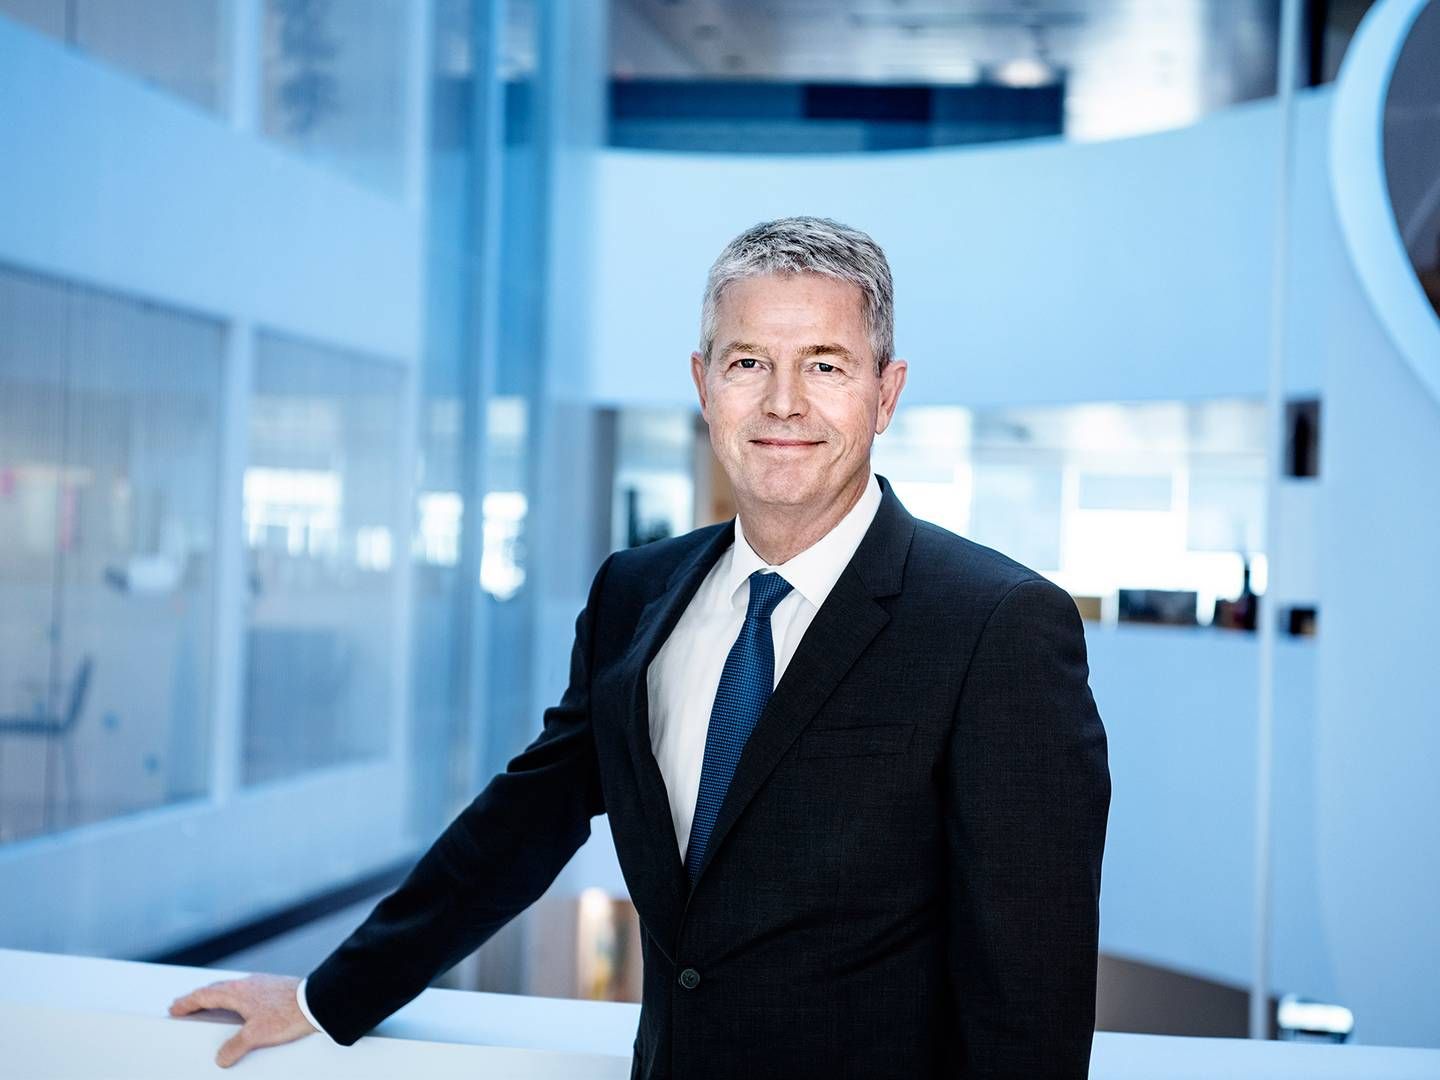 Hasse Jørgensen has been CEO of the pension company Sampension since 2010. | Foto: Pr/sampension